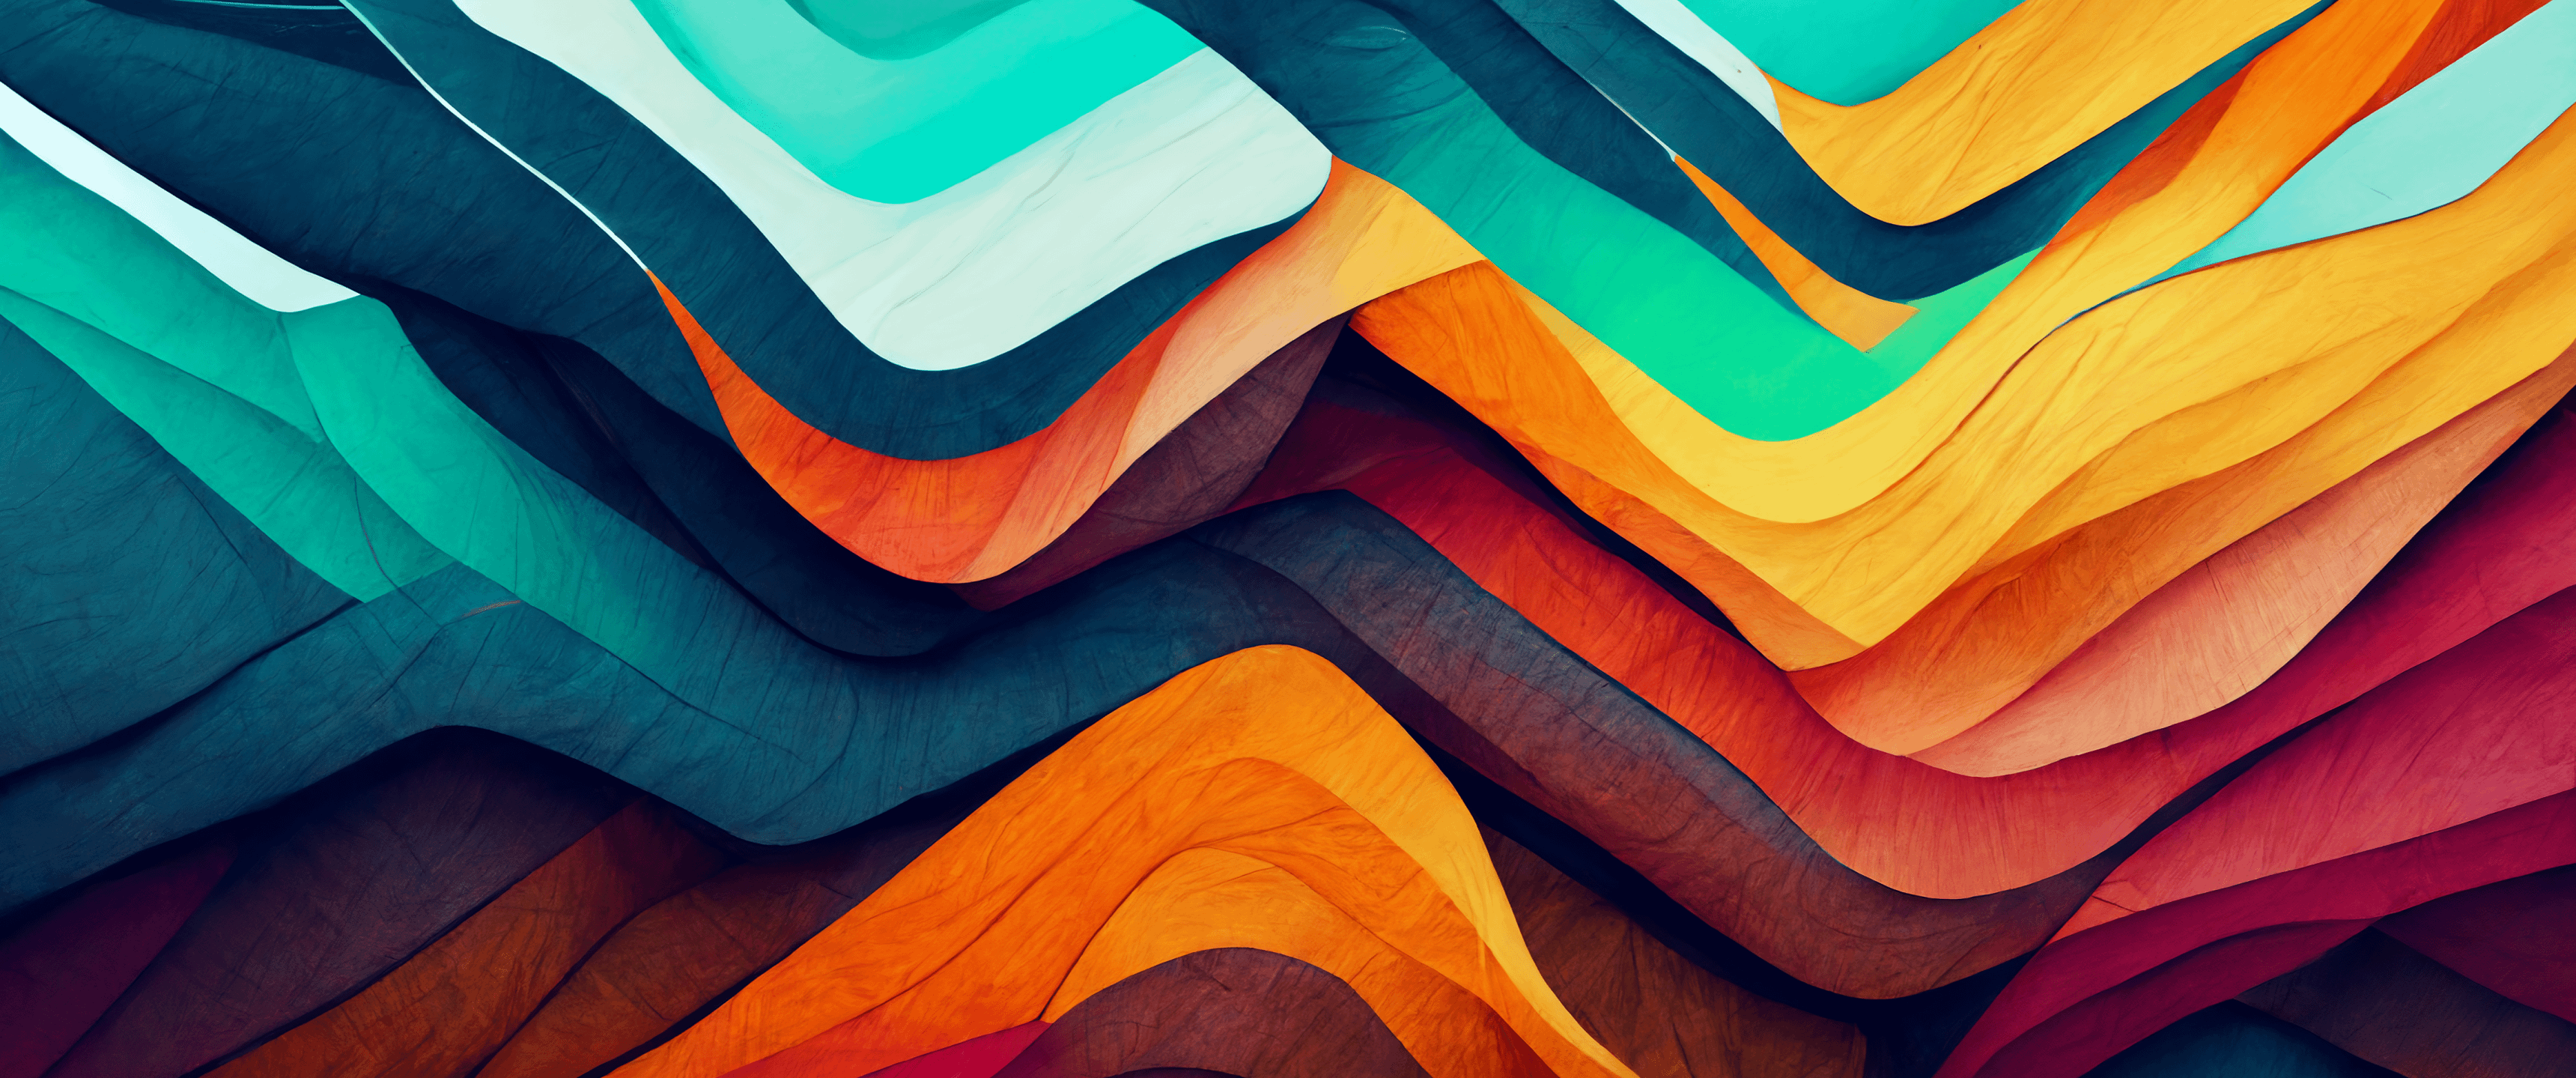 Abstract Waves Wallpaper R Midjourney